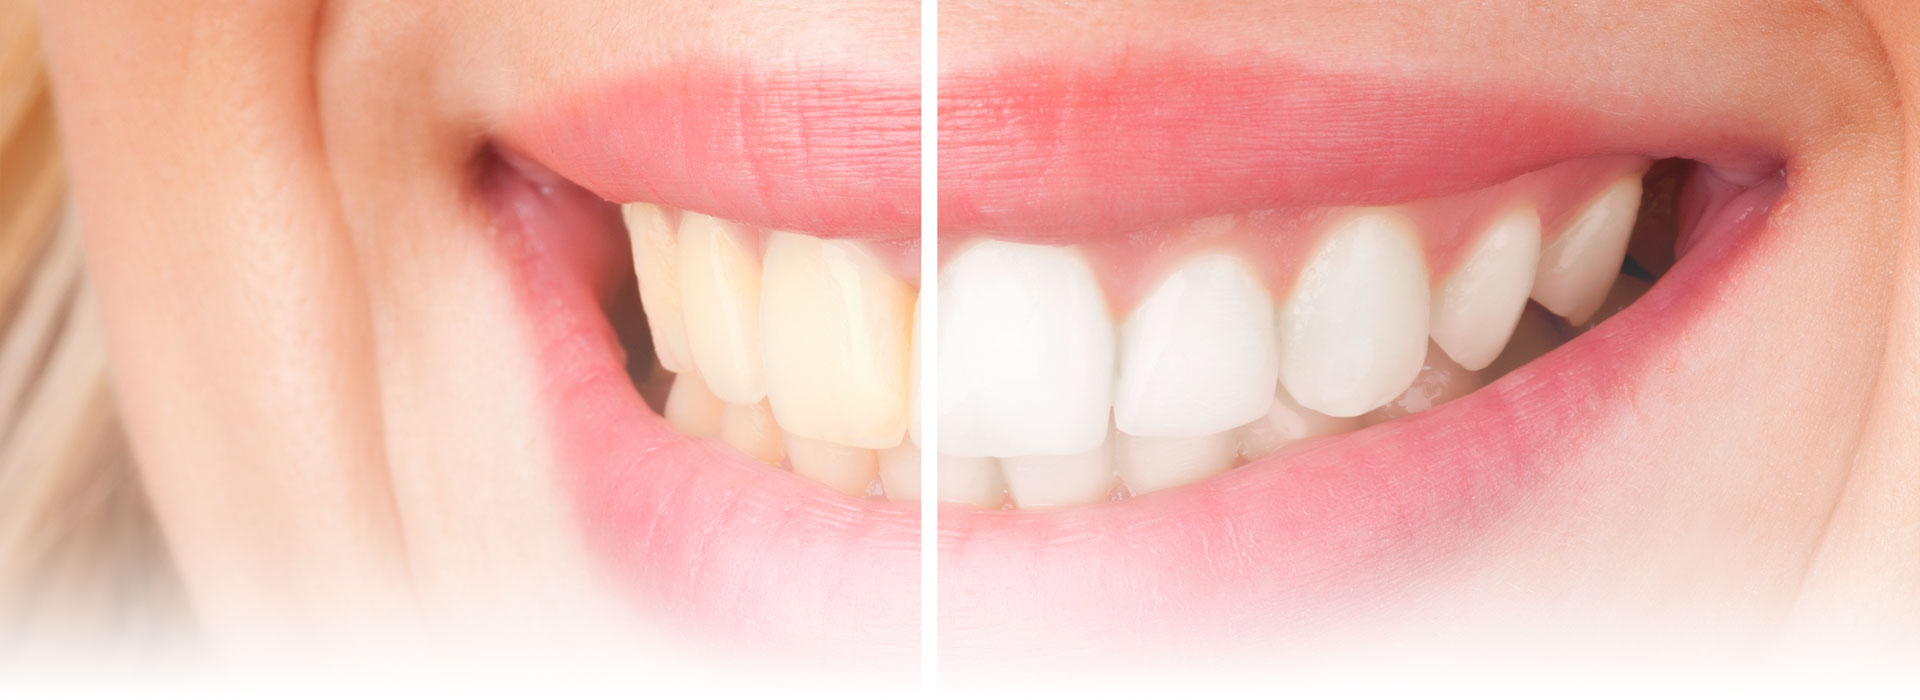 Teeth Whitening St. Louis MO - In-office Laser & At-home Whitening